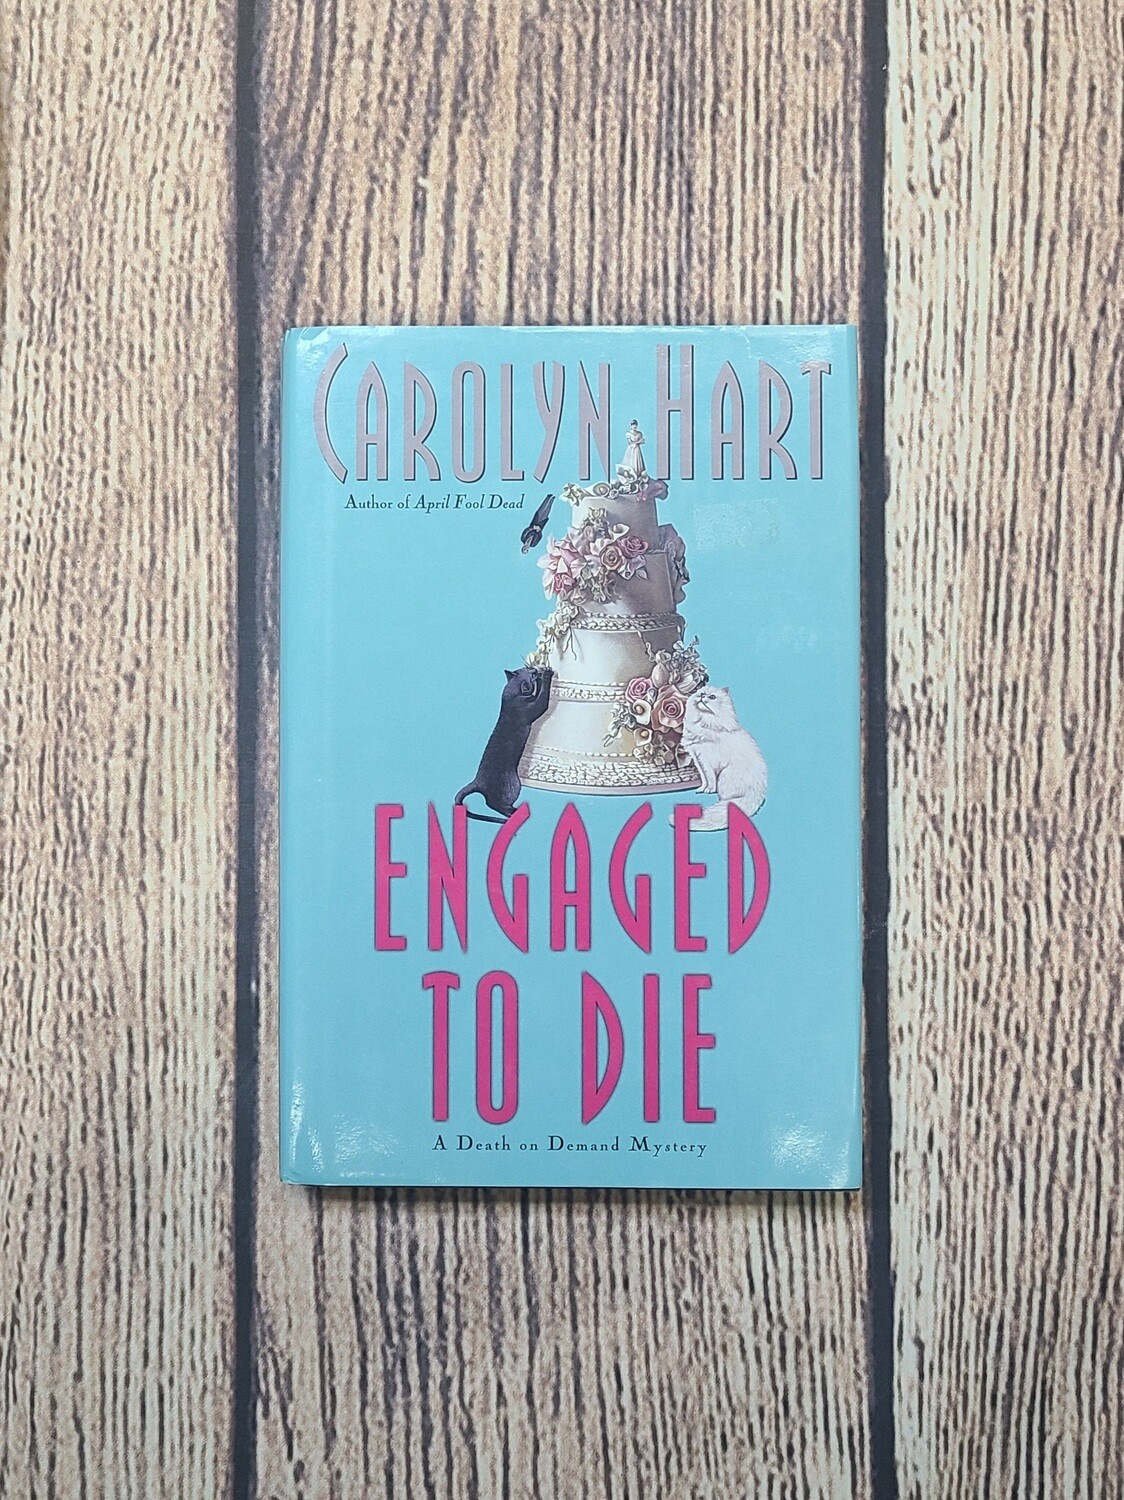 Engaged to Die by Carolyn Hart